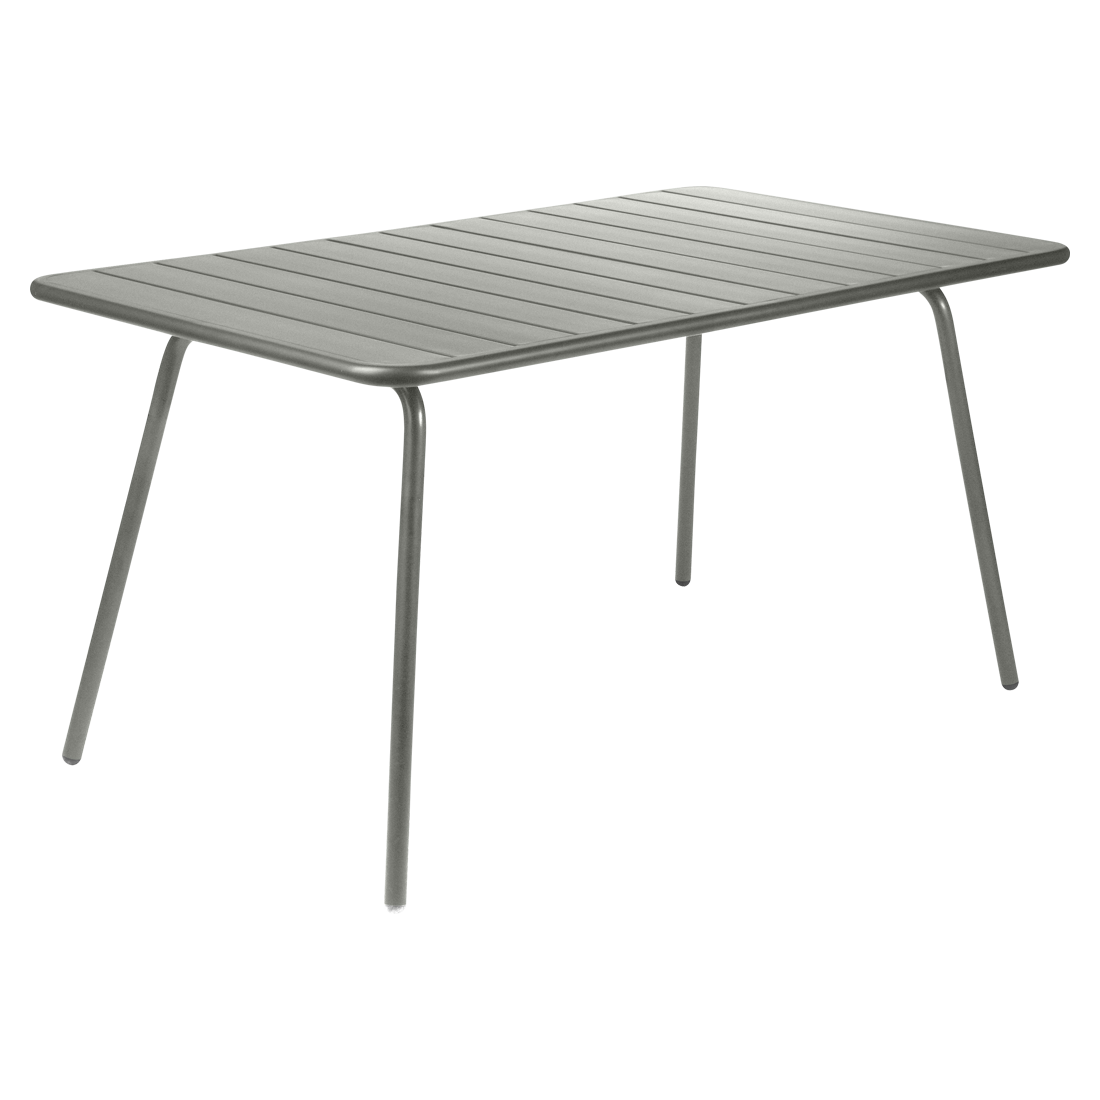 FERMOB Luxembourg 4-6 Seater Outdoor Dining Table